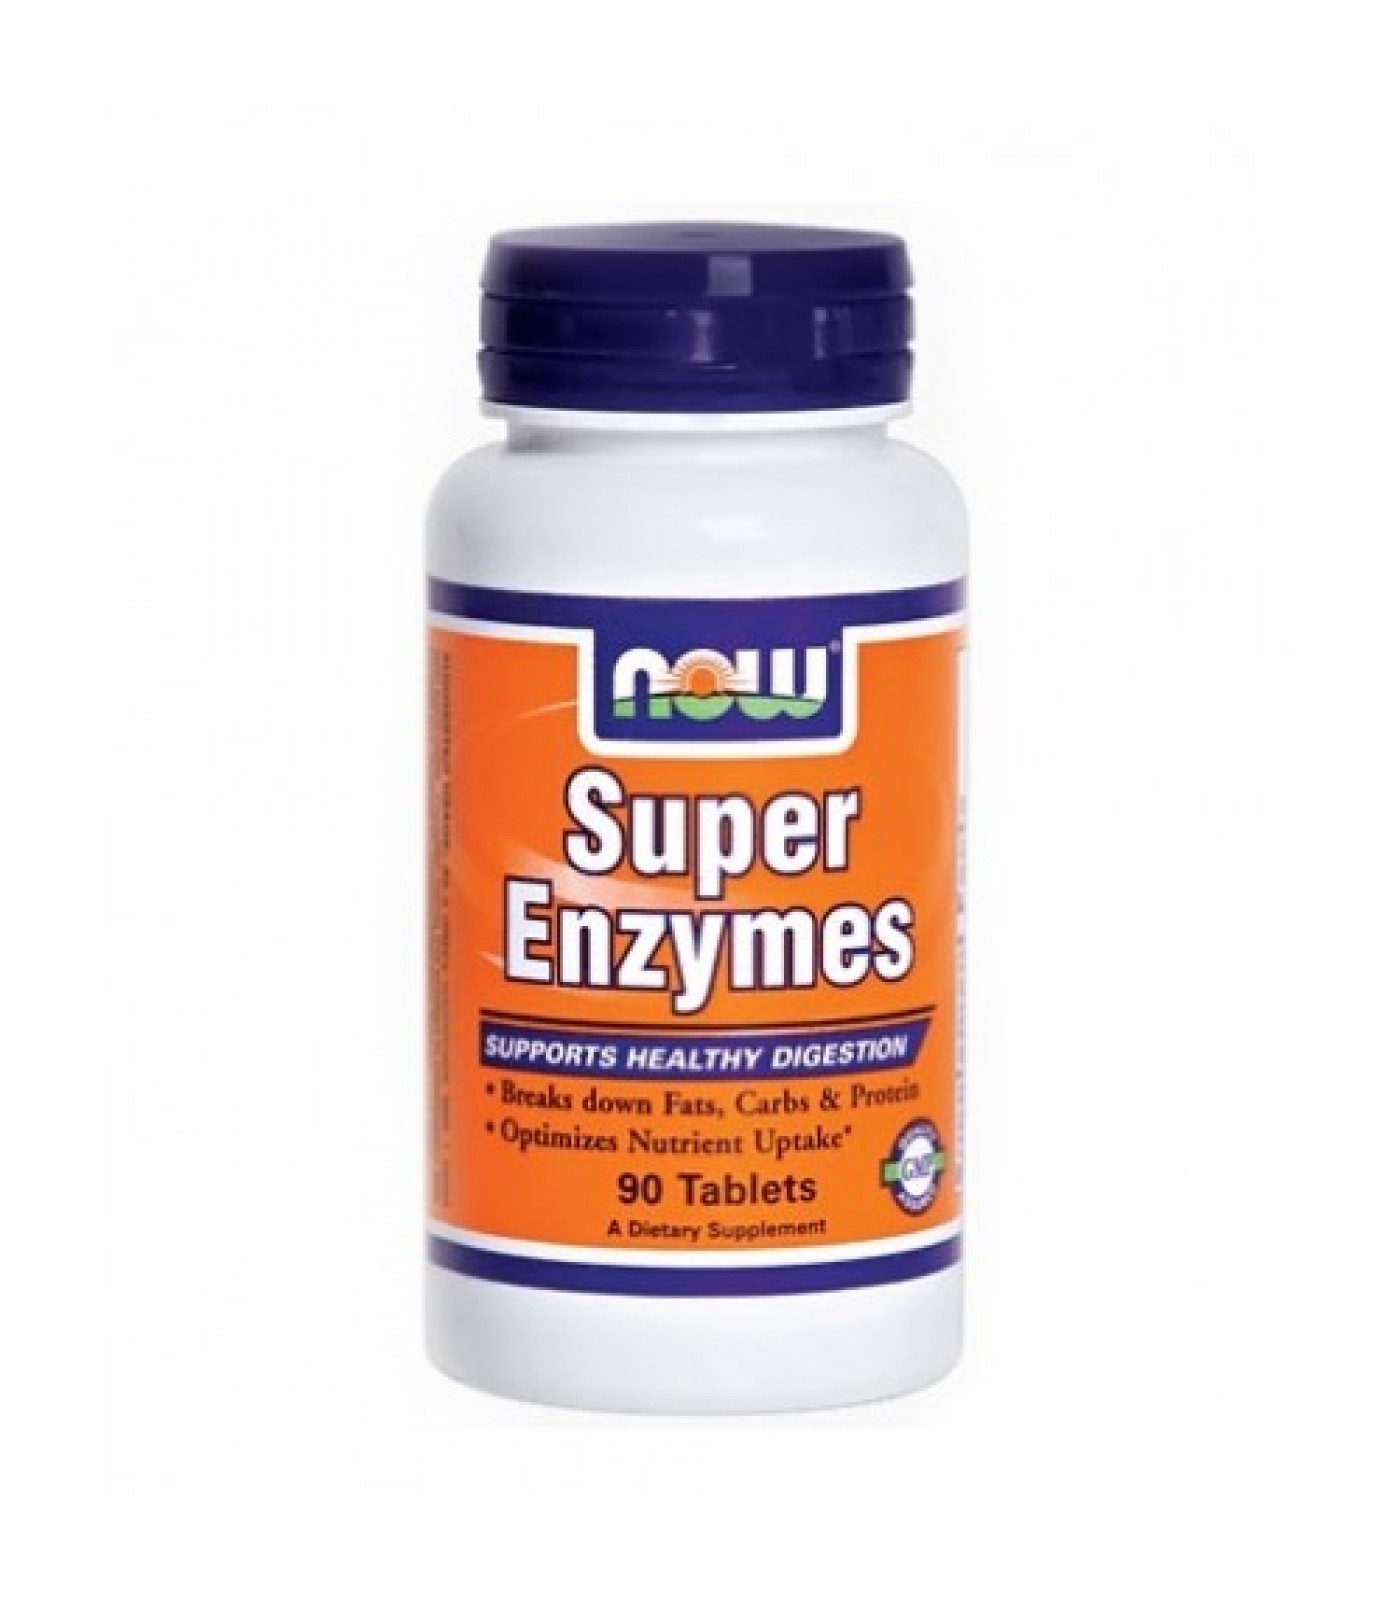 NOW - Super Enzymes / 90 Tabs.